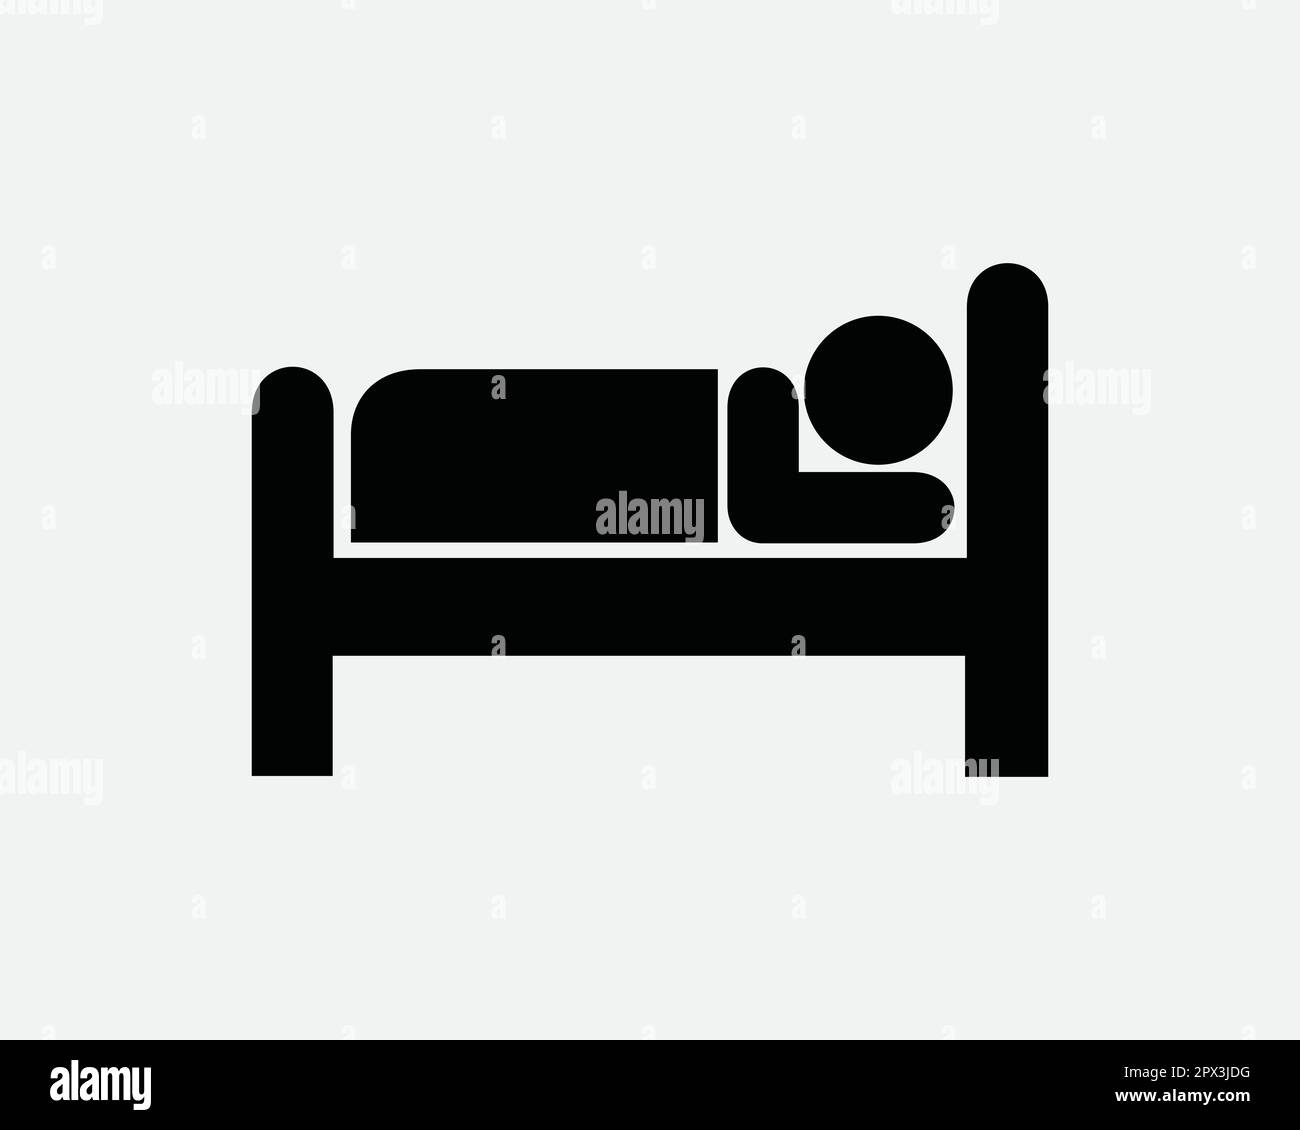 Sleep Icon. Man Sleeping Napping Nap Resting Rest on Hotel Motel Bed Bedroom Room Night Icon Sign Symbol Artwork Graphic Illustration Clipart Vector Stock Vector